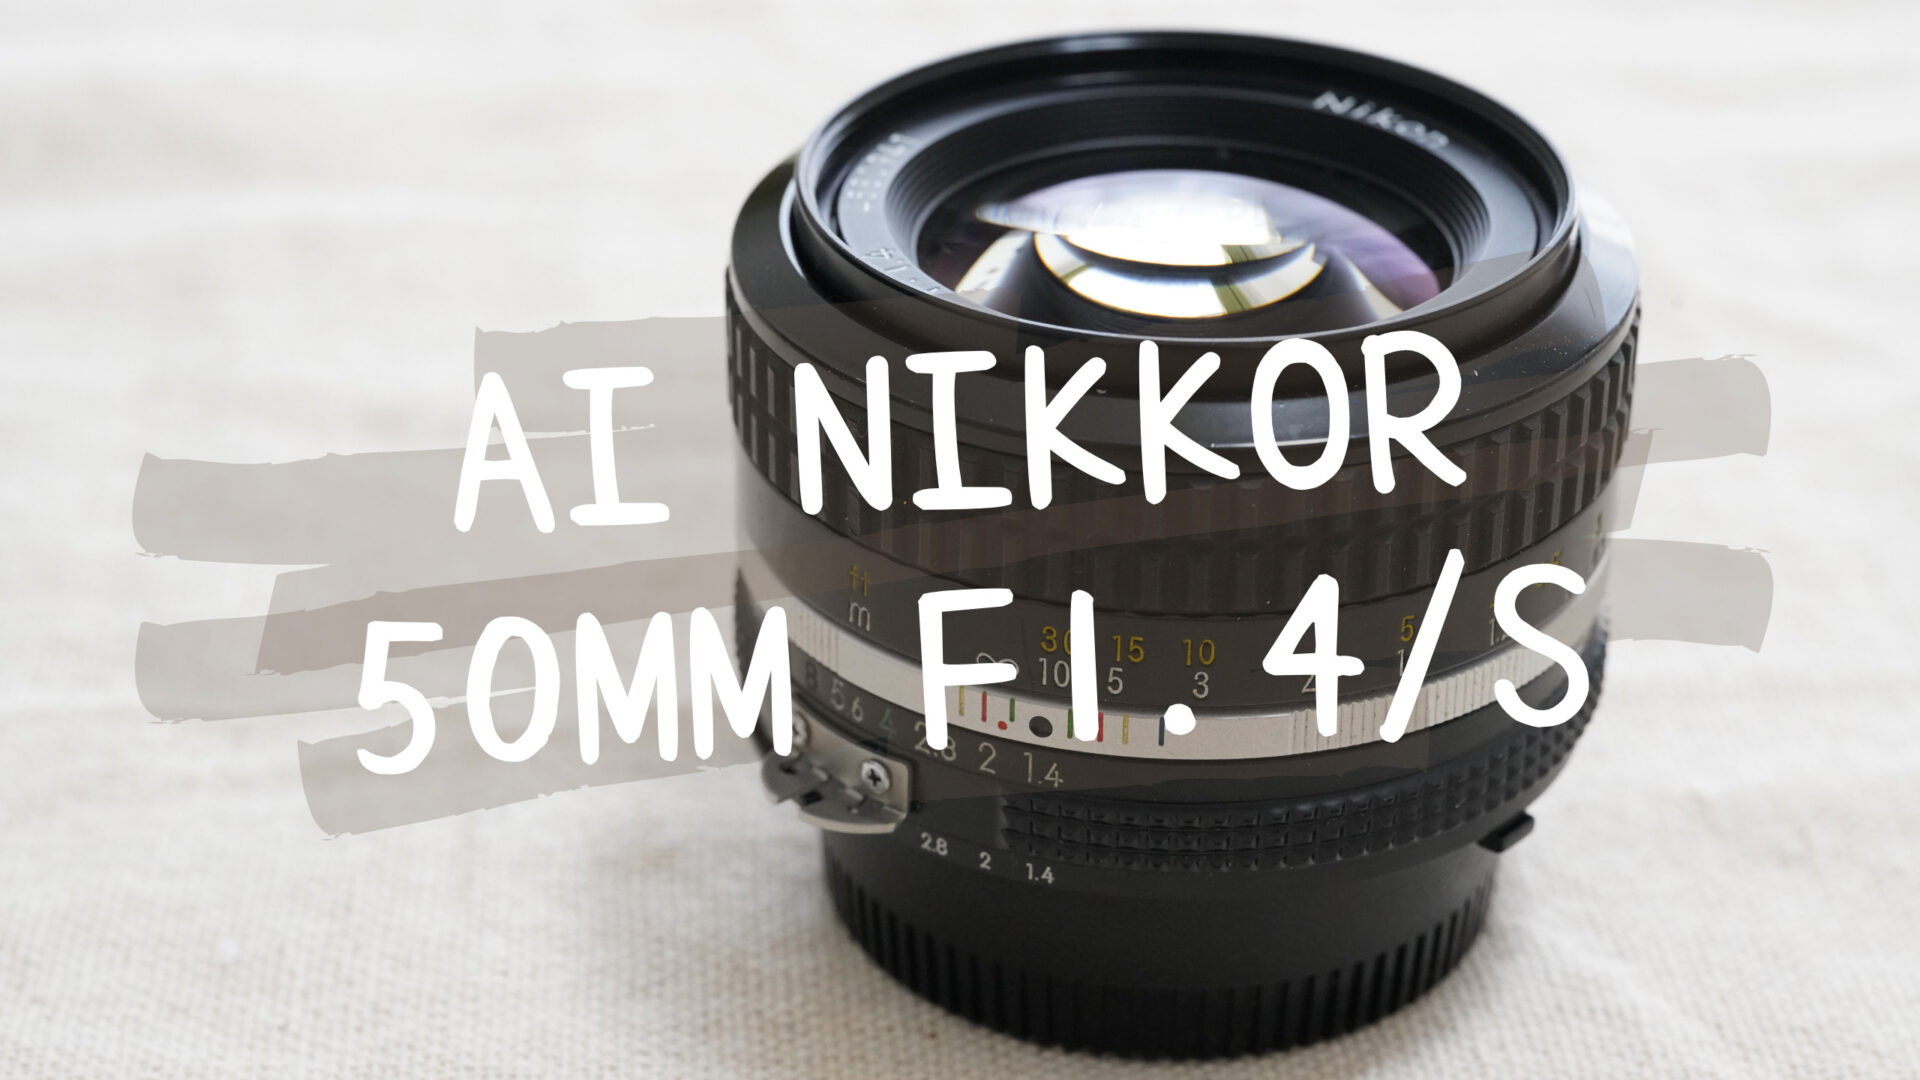 ai nikkor 50mm f/1.4s